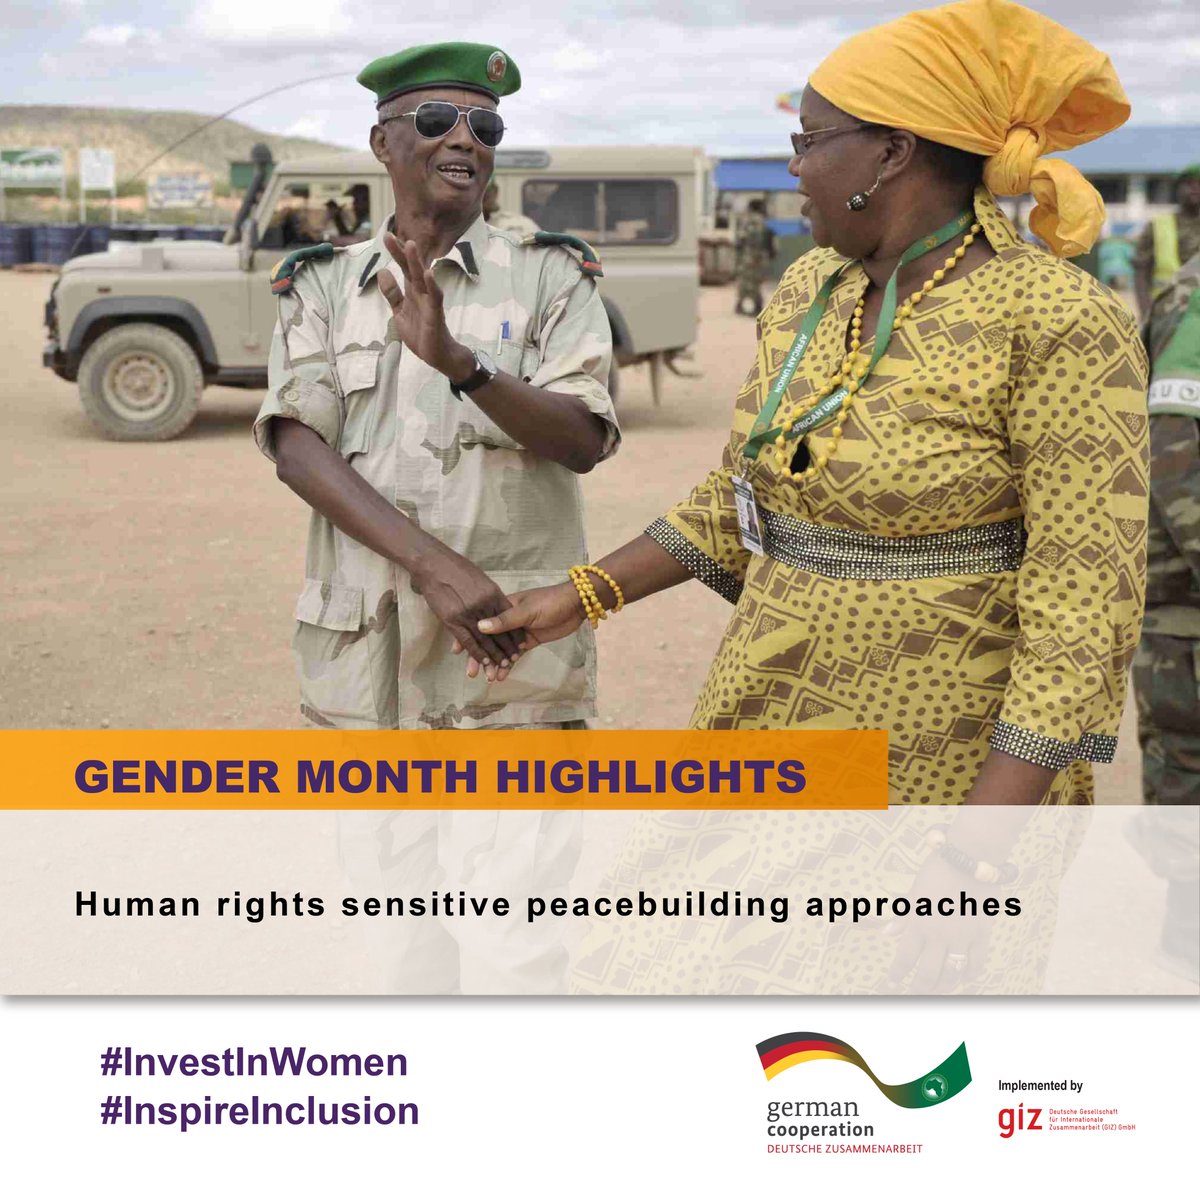 📢Advancing women's rights, equality, & meaningful participation in #PeaceBuilding through #HumanRights sensitive approaches.⚧️✊🏿 We support the @_AfricanUnion and its different pilot initiatives in cooperation with #CivilSociety. #InspireInclusion